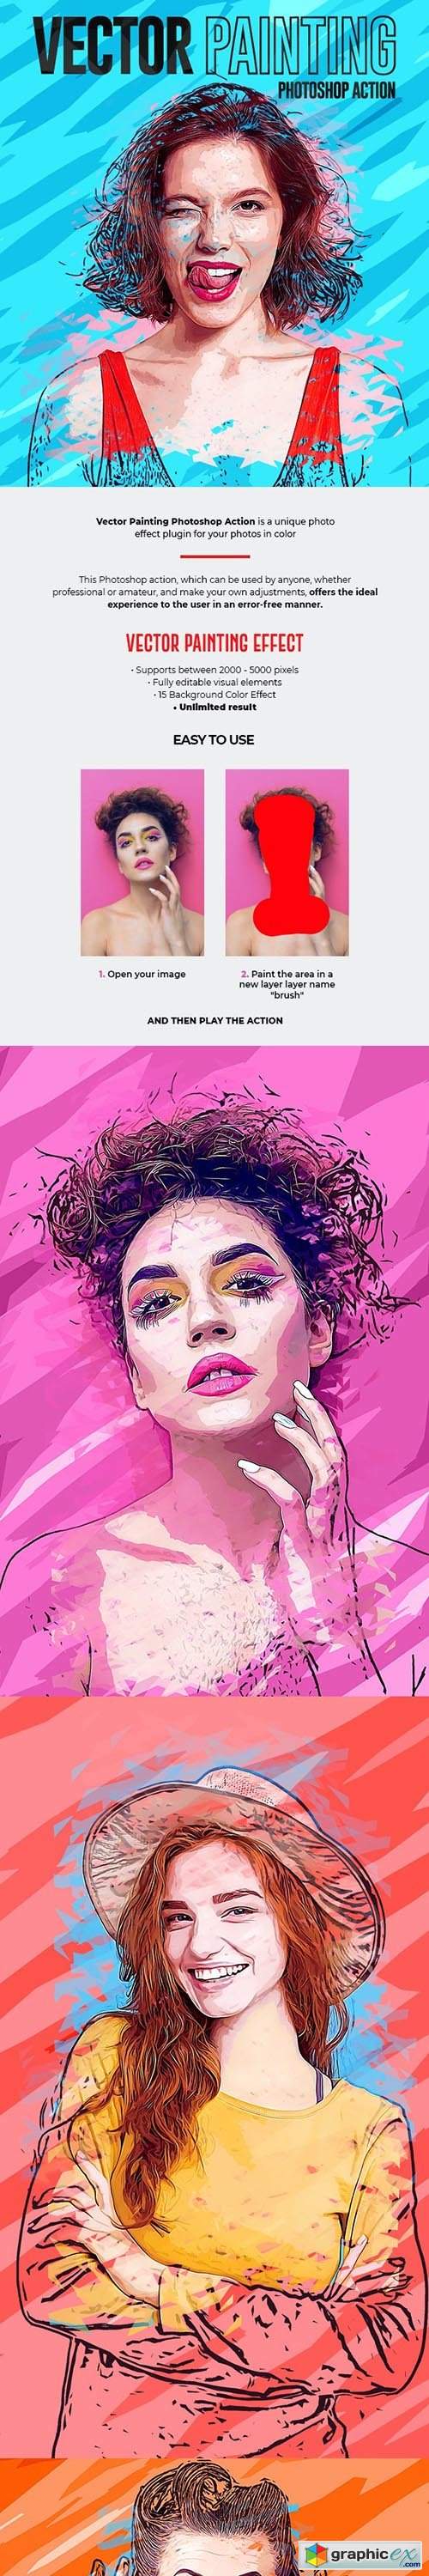 Vector Painting Effect Photoshop Action 